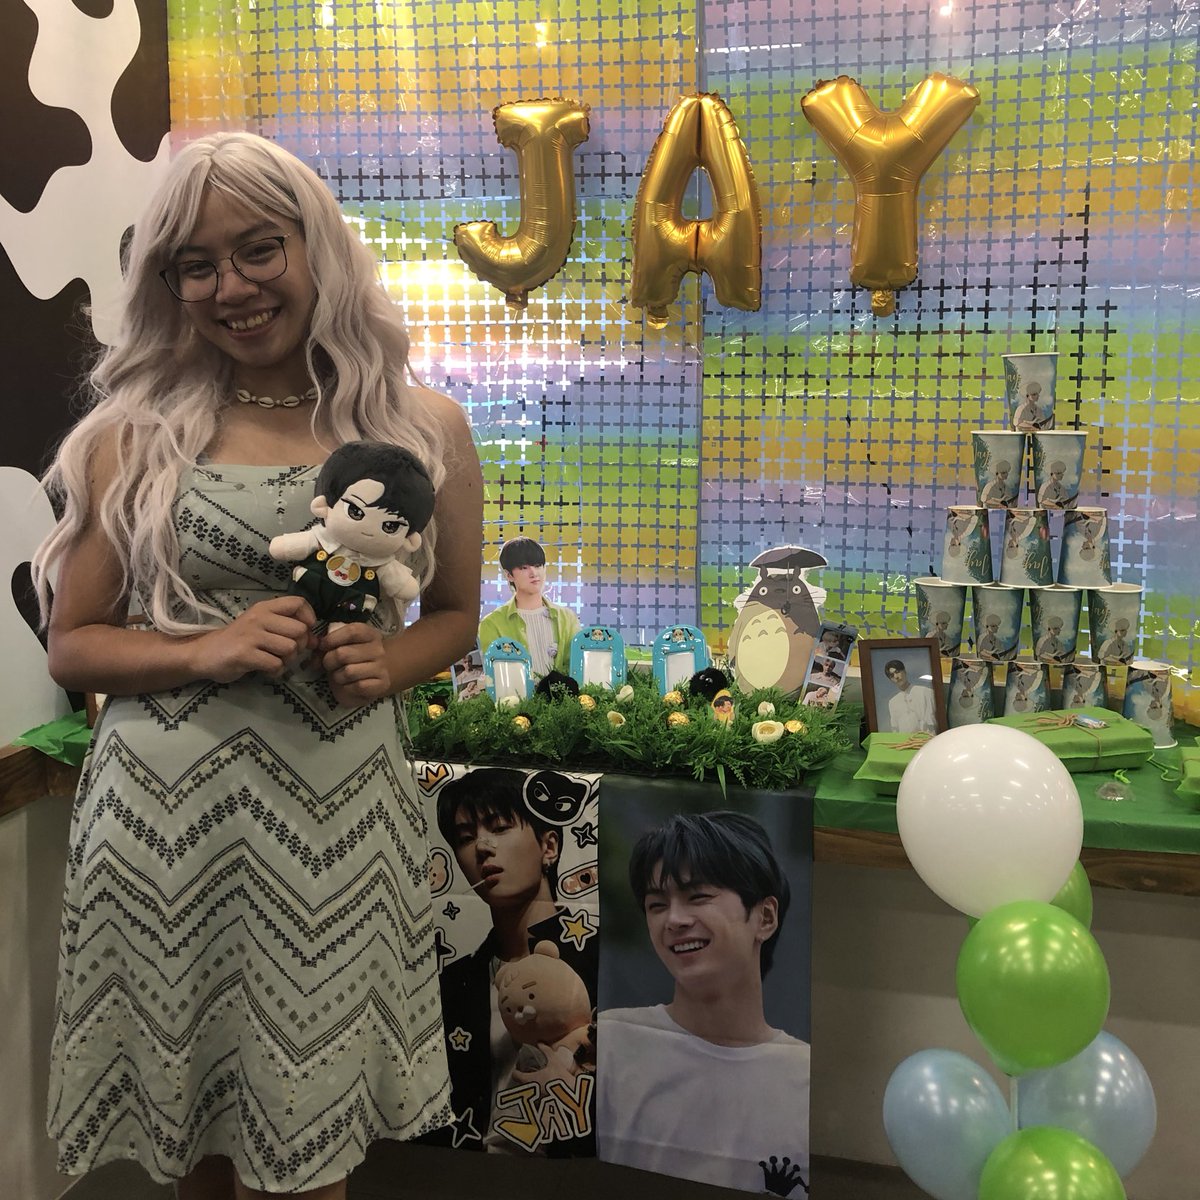 “My heart is stronger now that you are in it”

This took me weeks to post coz the event still brings me tears. Indeed, my warmest Jay you are loved, appreciated and seen 🥹💚

#JayInTheGHIBLIWorld @ENFAMEvents 
#ENFAMEvents #BlossomingSpringJAY